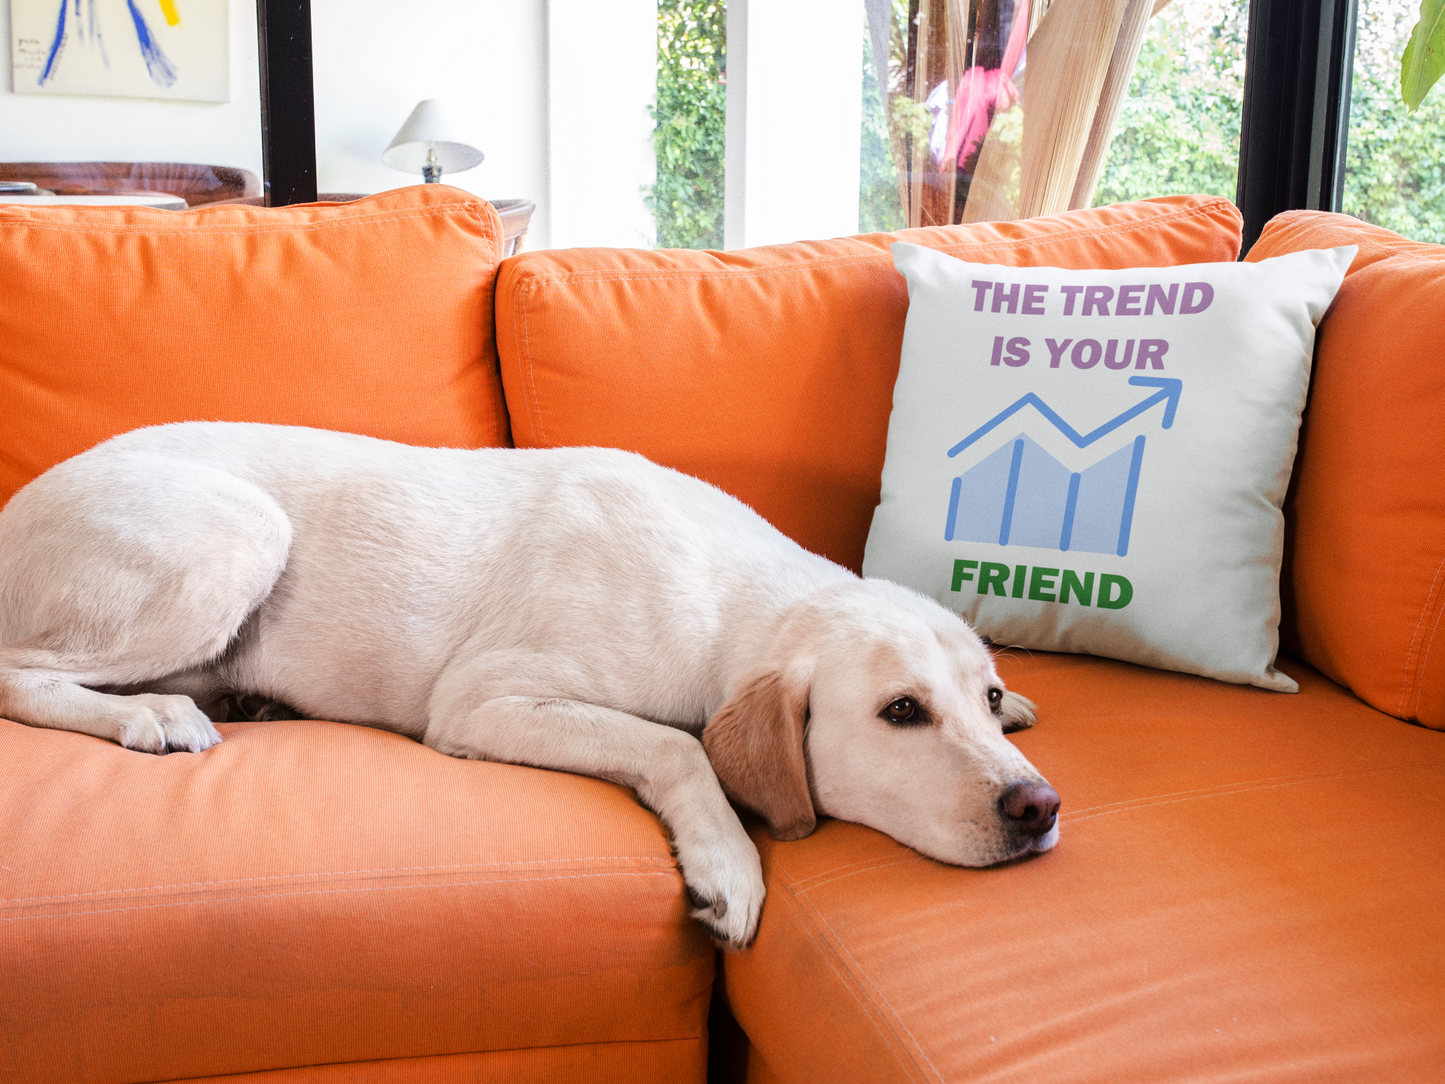 The Trend Is Your Friend  Printed Cushion